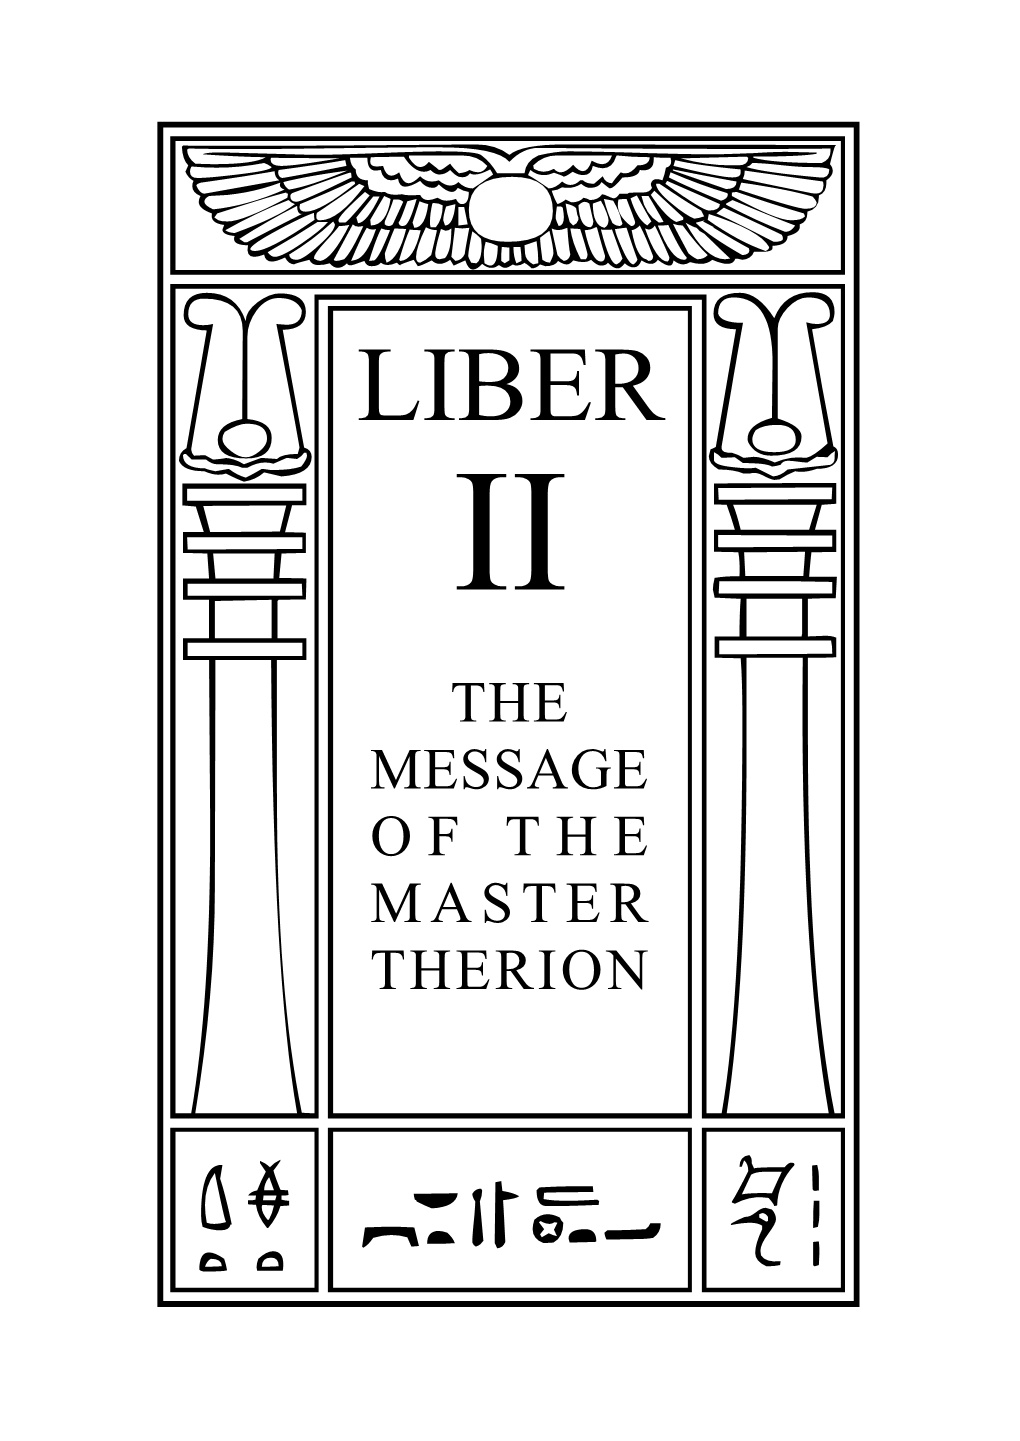 Liber Ii. the Message of the Master Therion